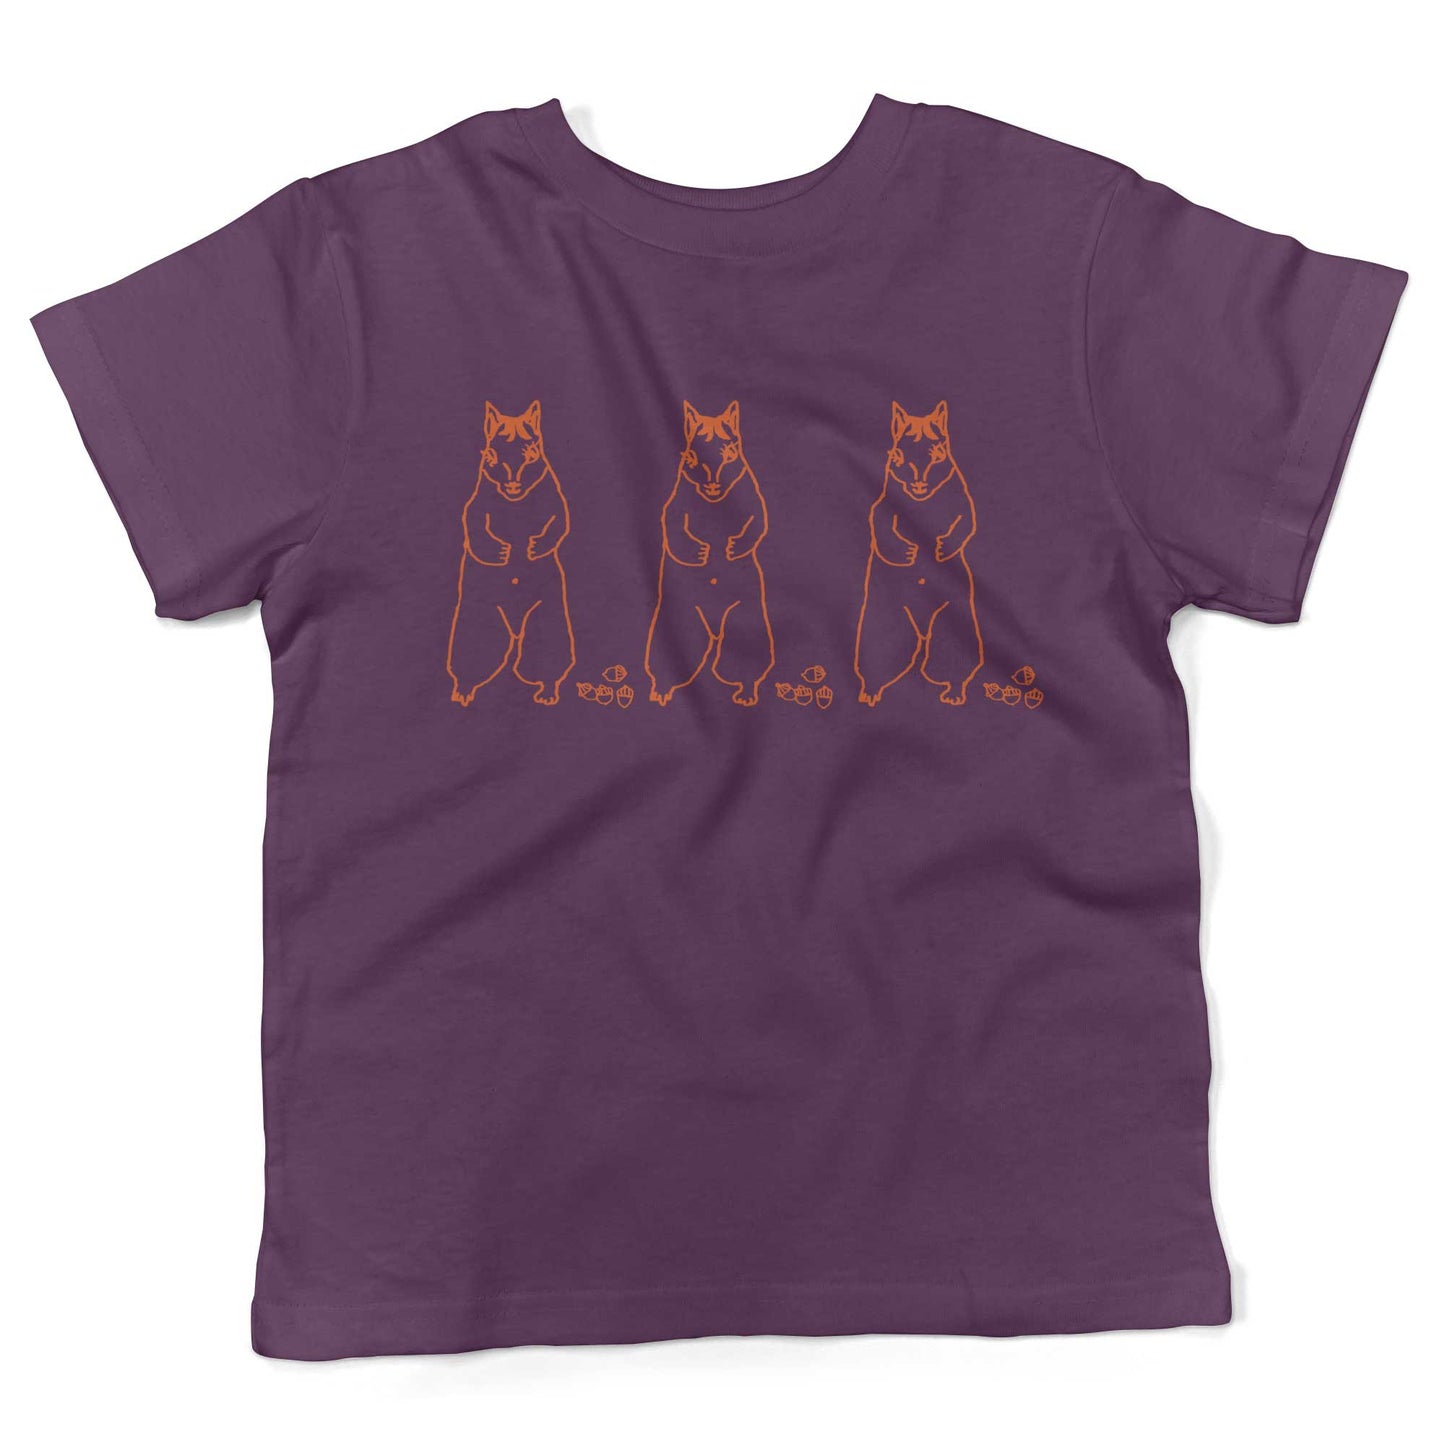 Cute Dancing Squirrels With Nuts Toddler Shirt-Organic Purple-2T